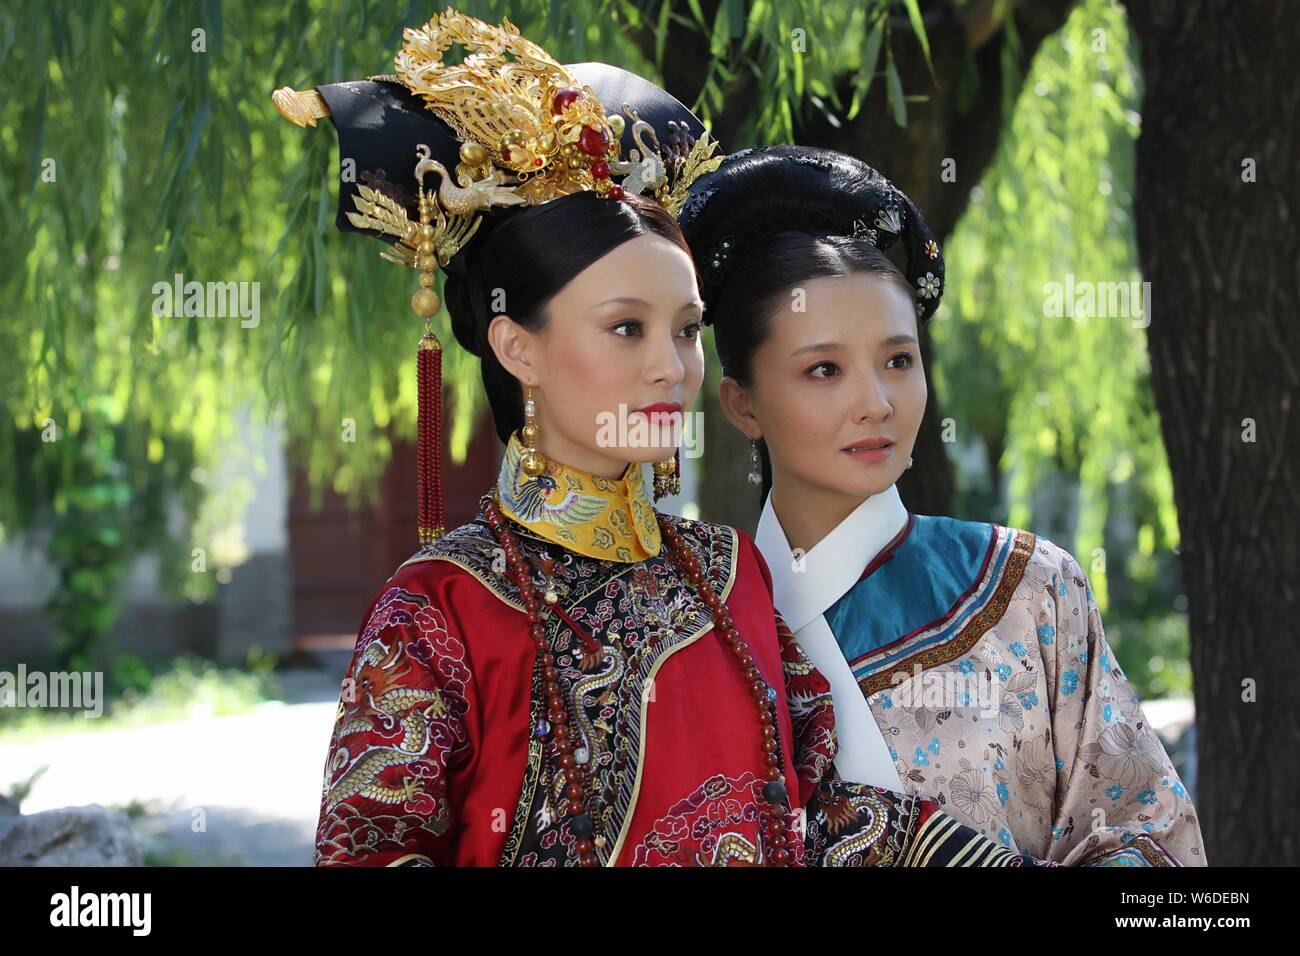 Handout still of the TV drama "Empresses in the Palace", also known as "The  Legend of Zhen Huan Stock Photo - Alamy